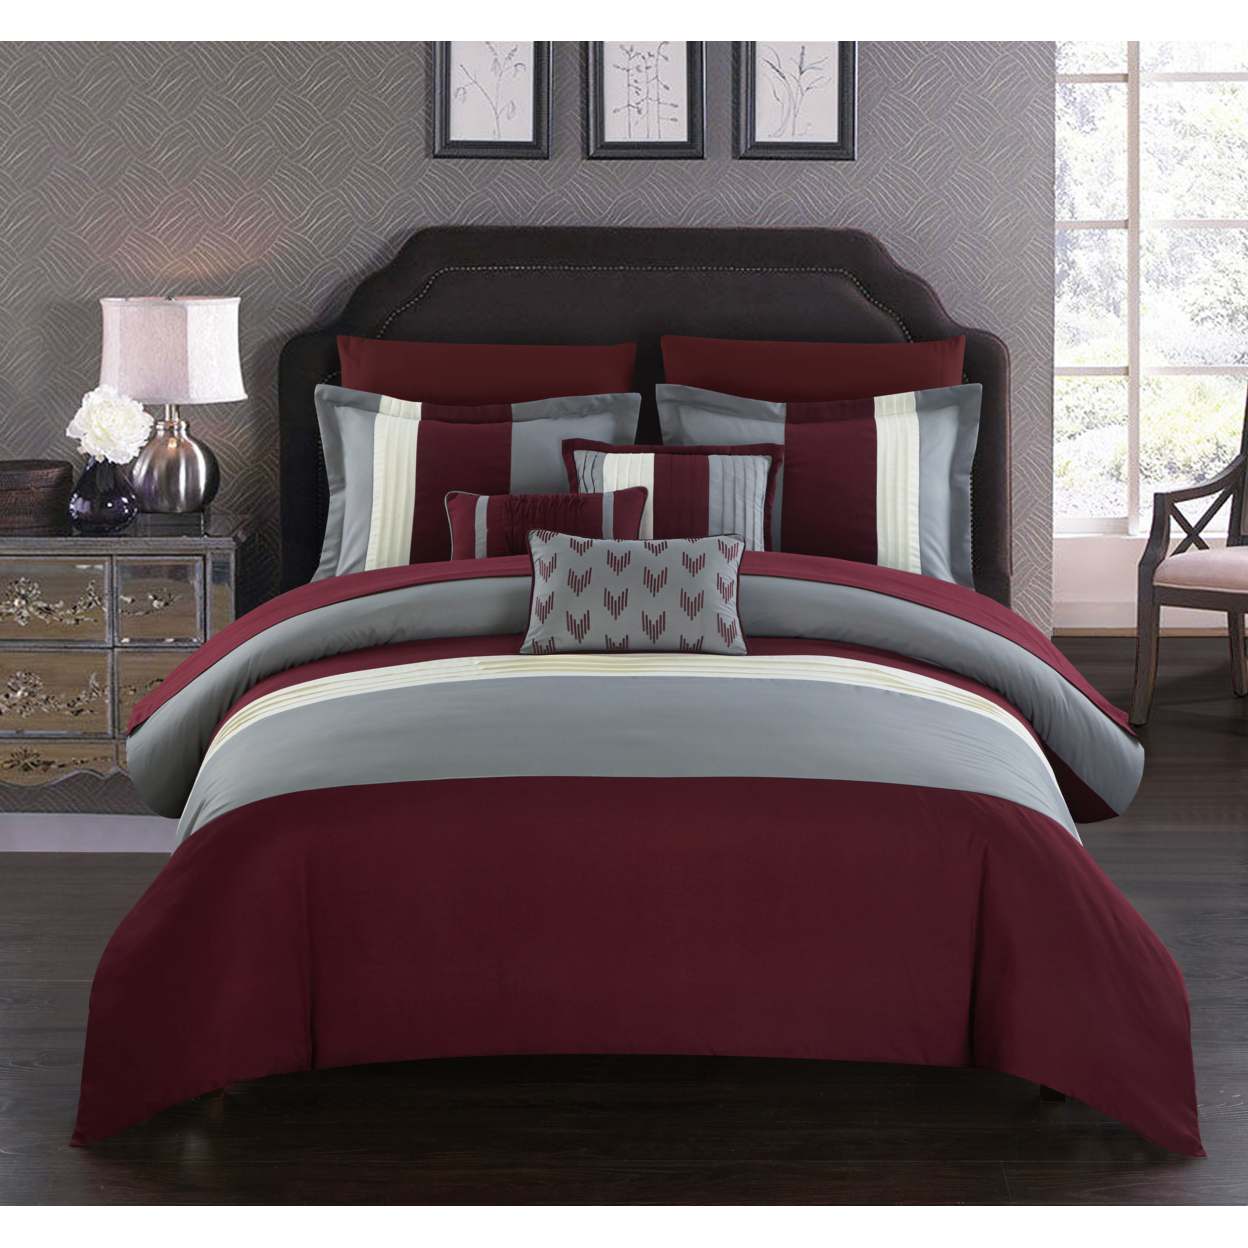 Rashi 10 Or 8 Piece Color Block Bed In A Bag Bedding And Comforter Set - Plum, Queen